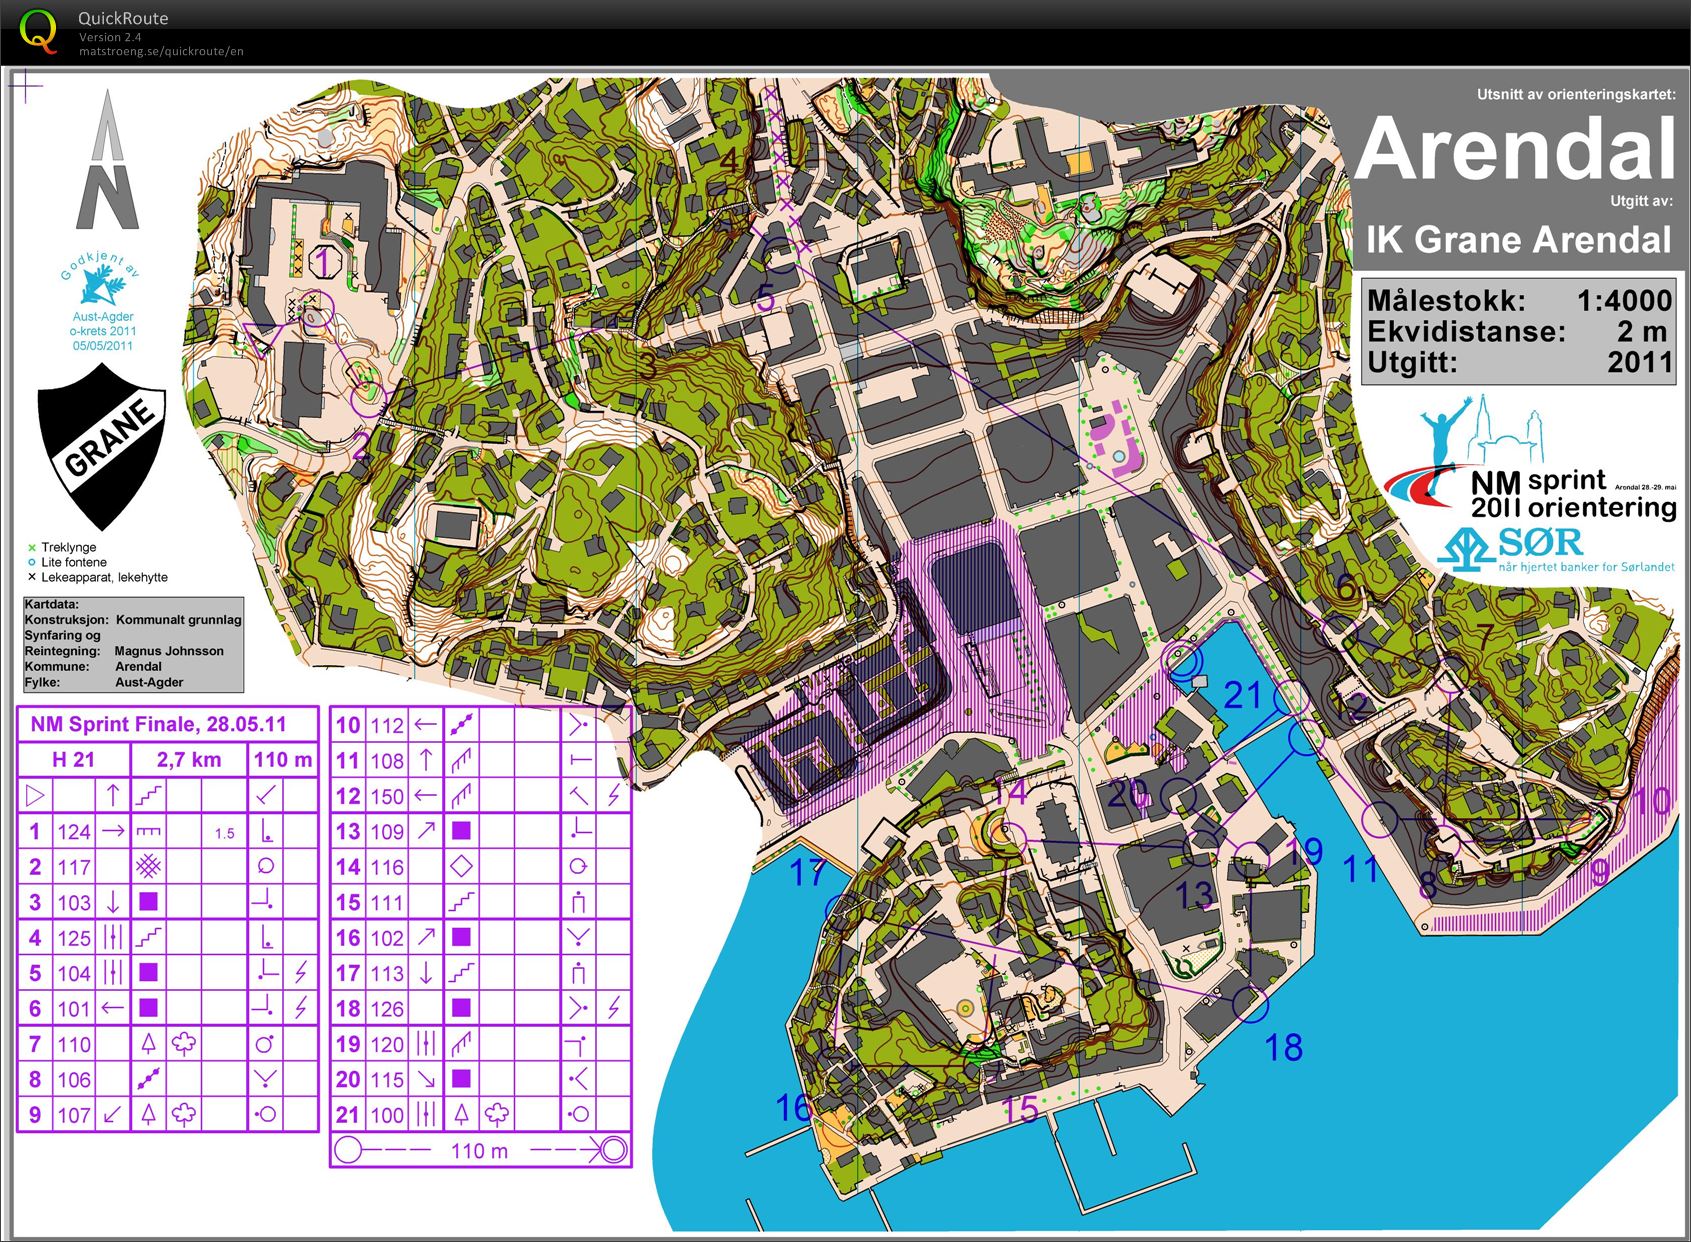 NM Sprint Arendal H21 course (09.07.2013)